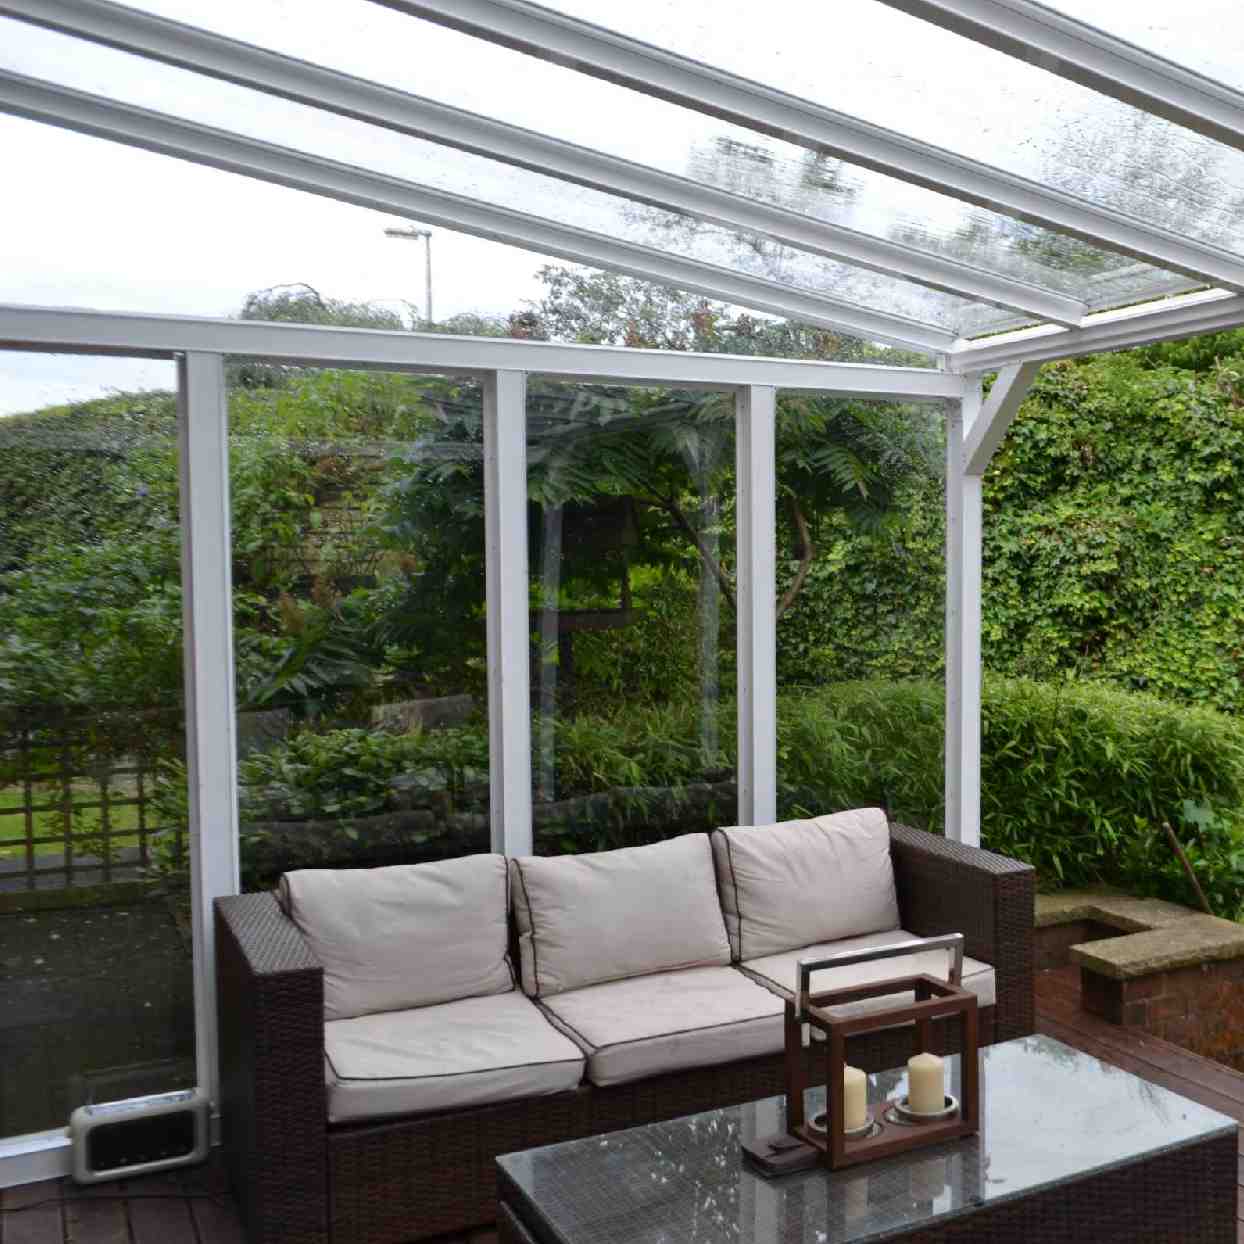 Buy Omega Verandah White with 6mm Glass Clear Plate Polycarbonate Glazing - 5.6m (W) x 1.5m (P), (3) Supporting Posts online today